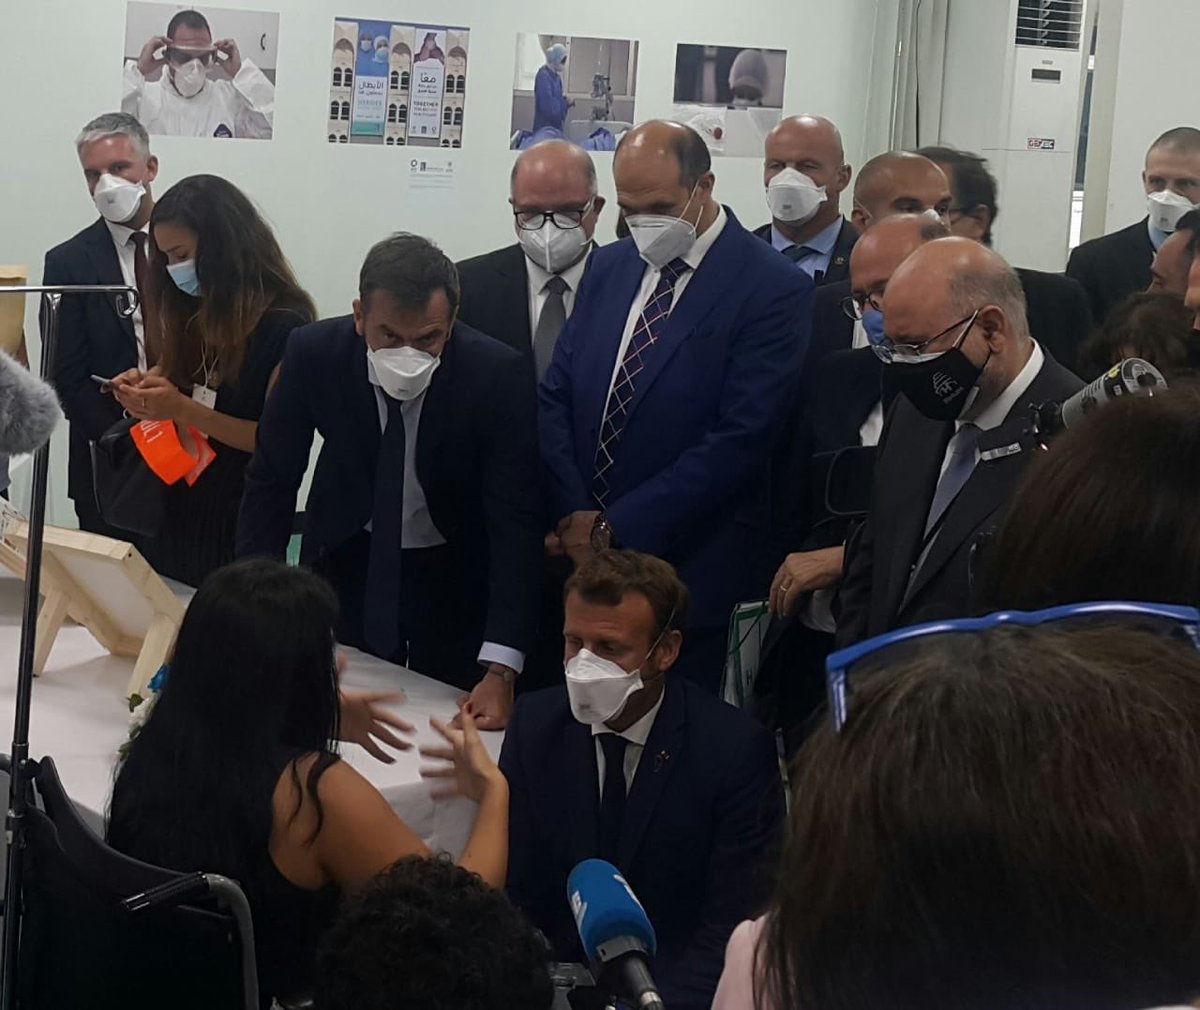 1.6 President  @EmmanuelMacron’s visit to RHUH, and the announcement of a €7 million to support the hospital, are very significant: Both acknowledge the important role of the health sector especially during these difficult times, and also underscore the following points: